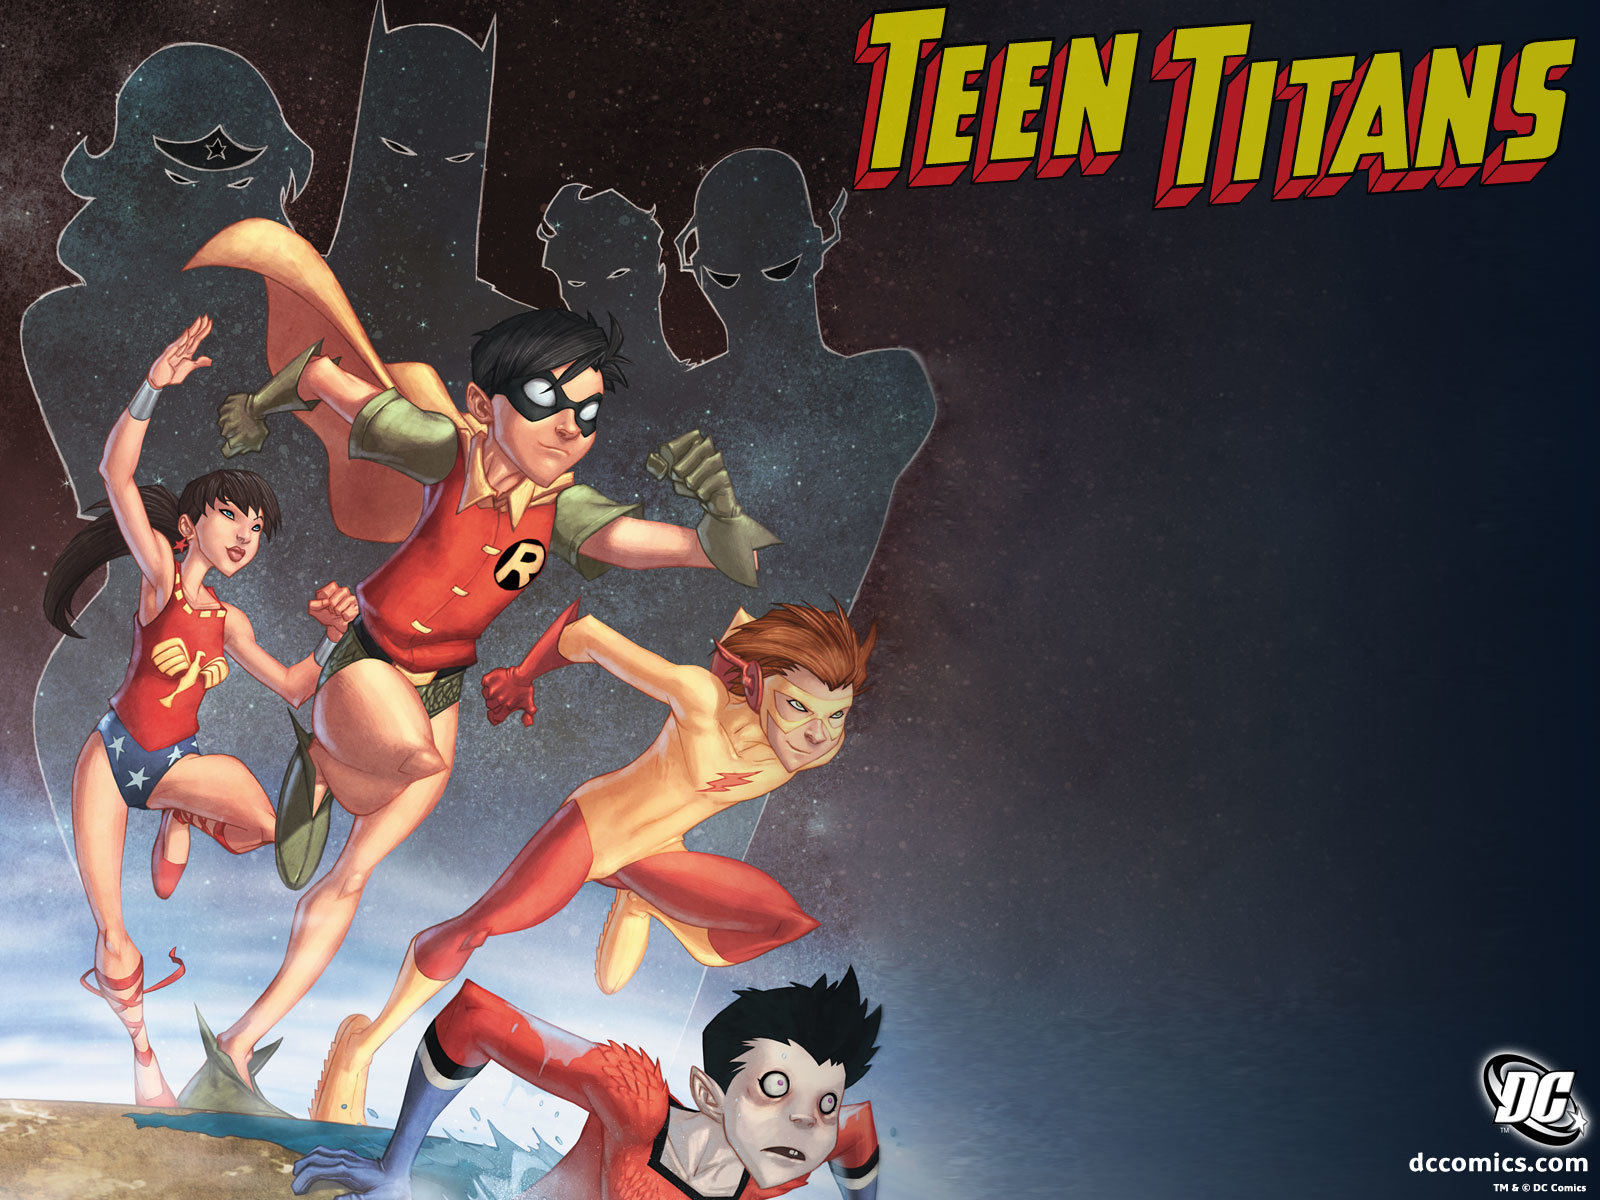 Download hd 1600x1200 Teen Titans desktop background ID:52560 for free